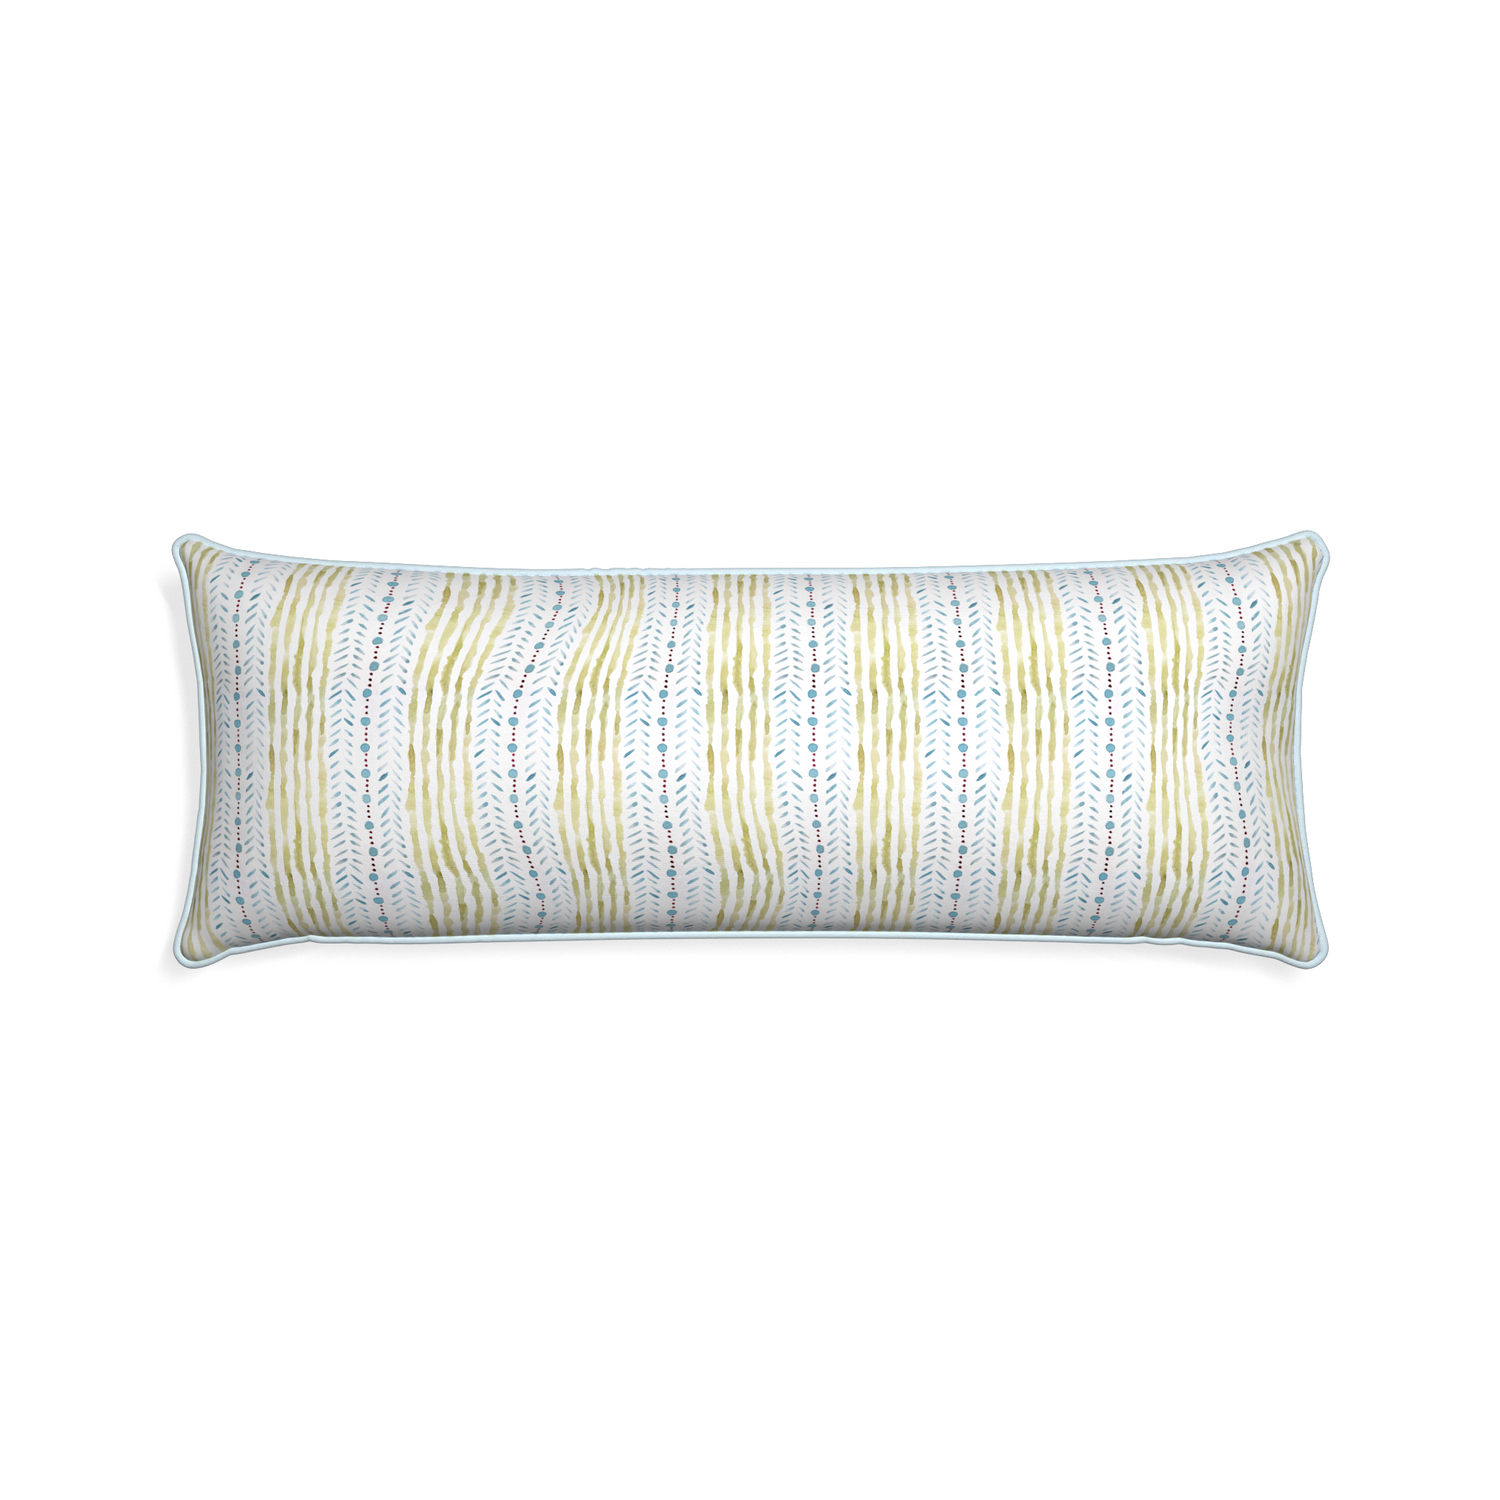 Xl-lumbar julia custom blue & green stripedpillow with powder piping on white background